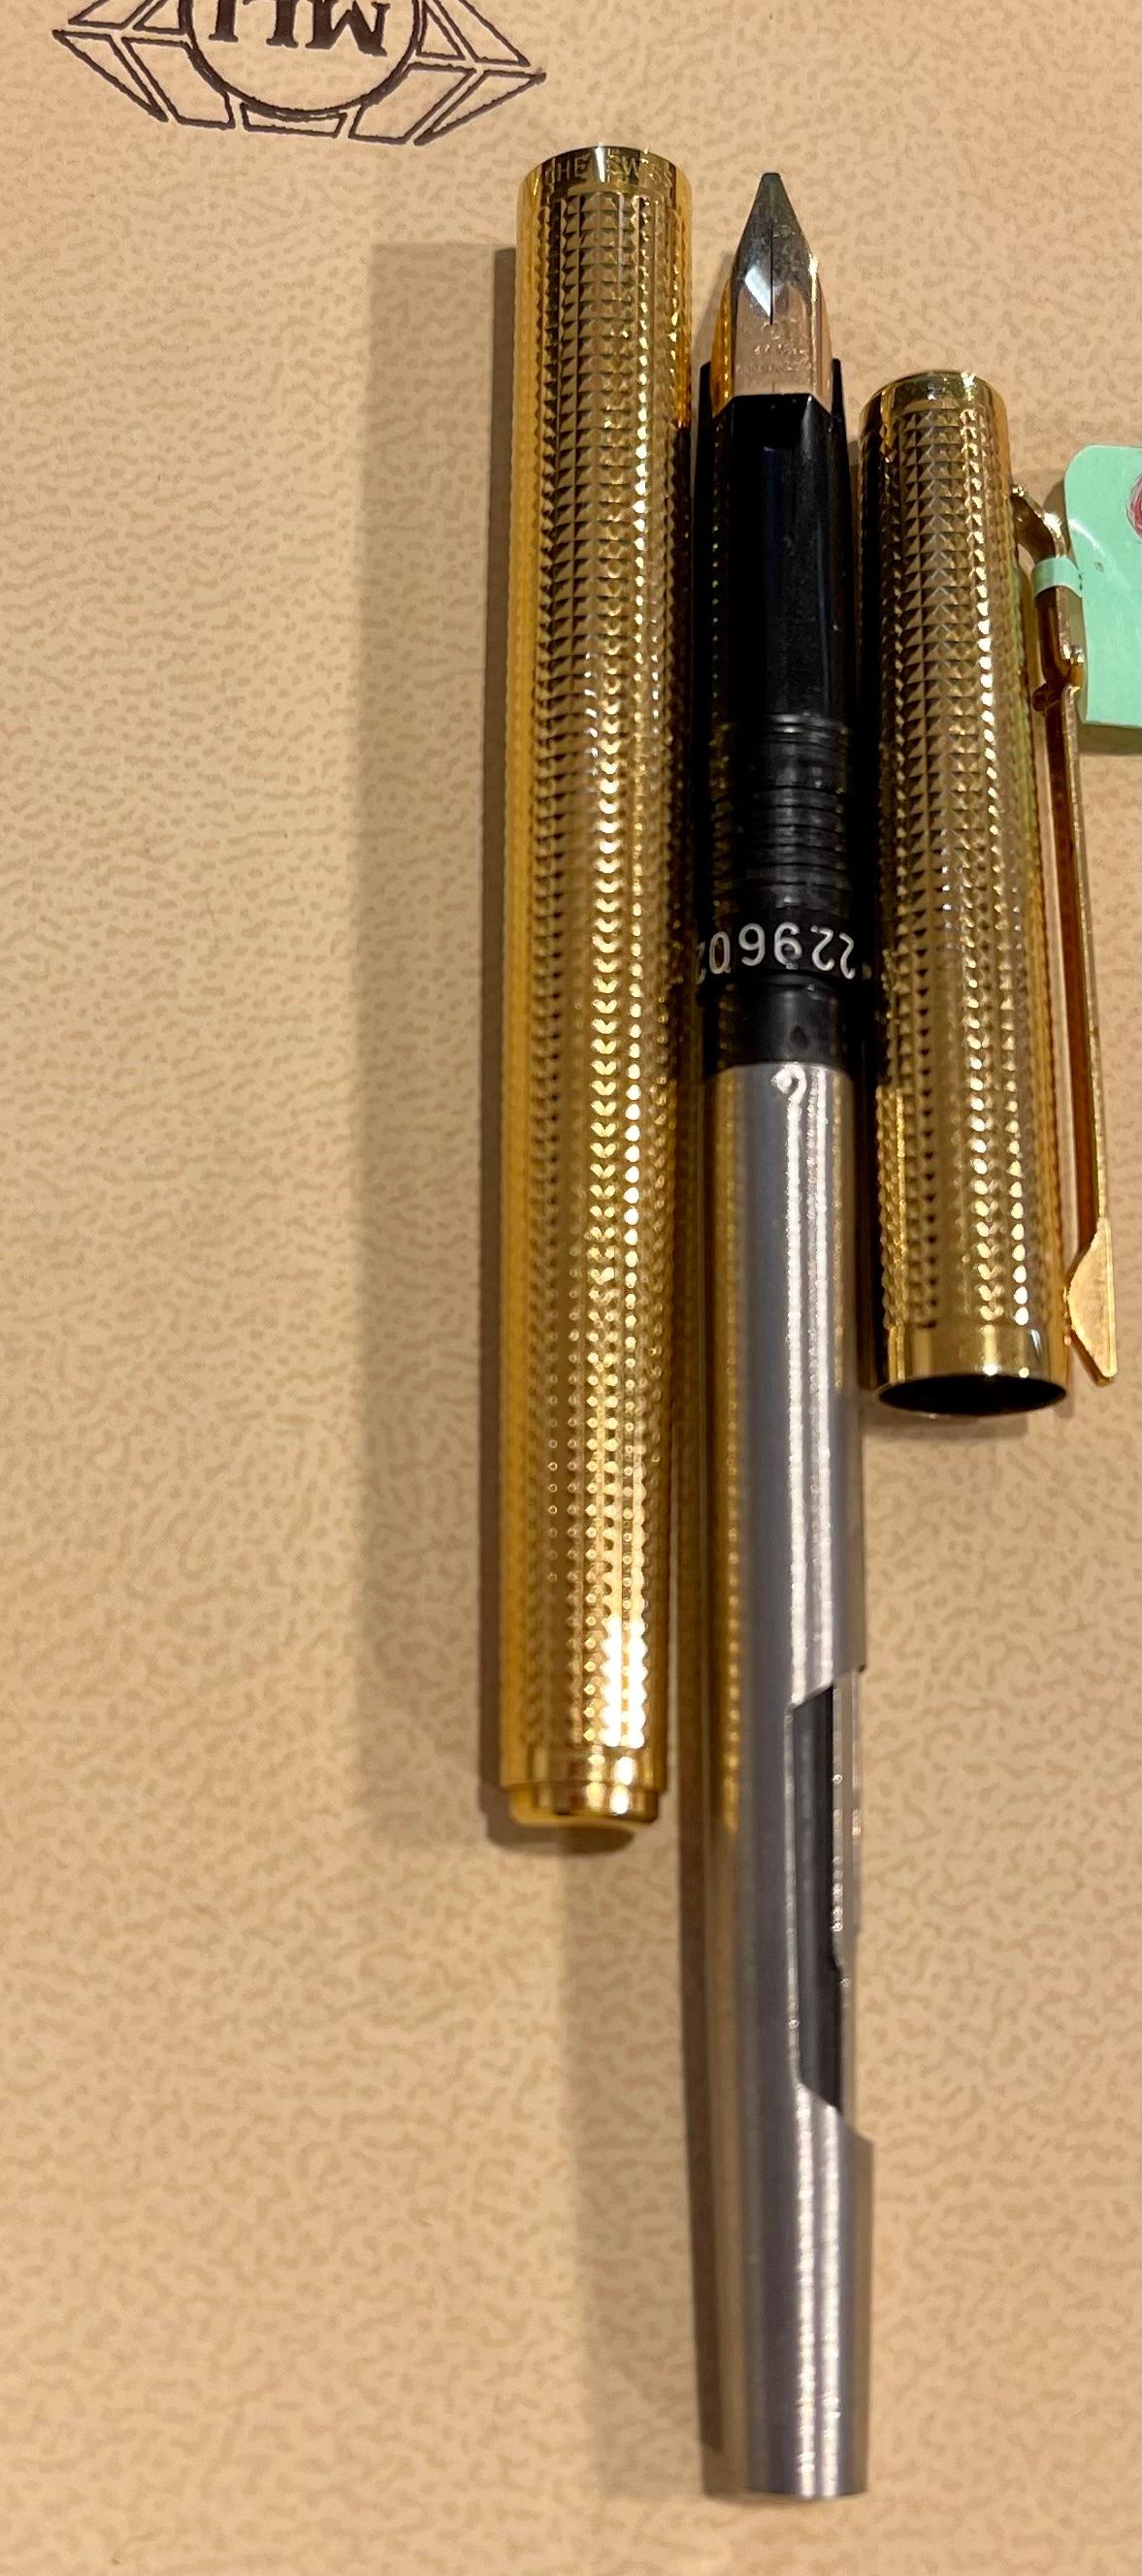 100 % authentic and Vintage 
Brand: Caran d'Ache
Stamped : Caran d'Ache , Swiss , Gold Plated G , 229602
Caran d'Ache is one of the world's most renowned pen makers, creating writing tools with sensational style and unique characteristics. This